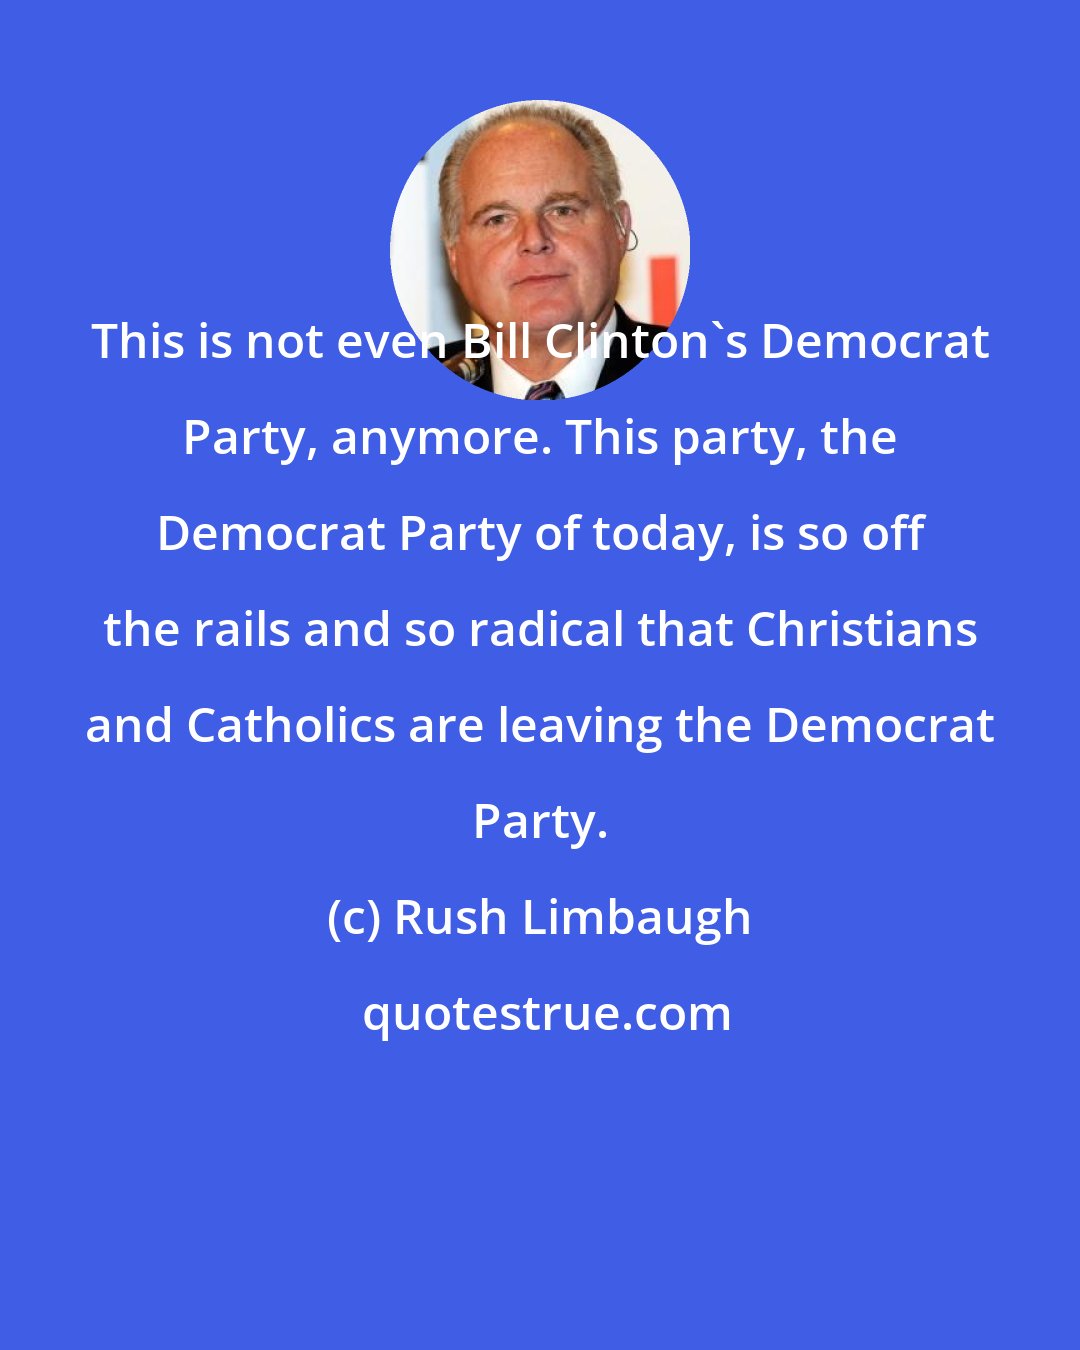 Rush Limbaugh: This is not even Bill Clinton's Democrat Party, anymore. This party, the Democrat Party of today, is so off the rails and so radical that Christians and Catholics are leaving the Democrat Party.